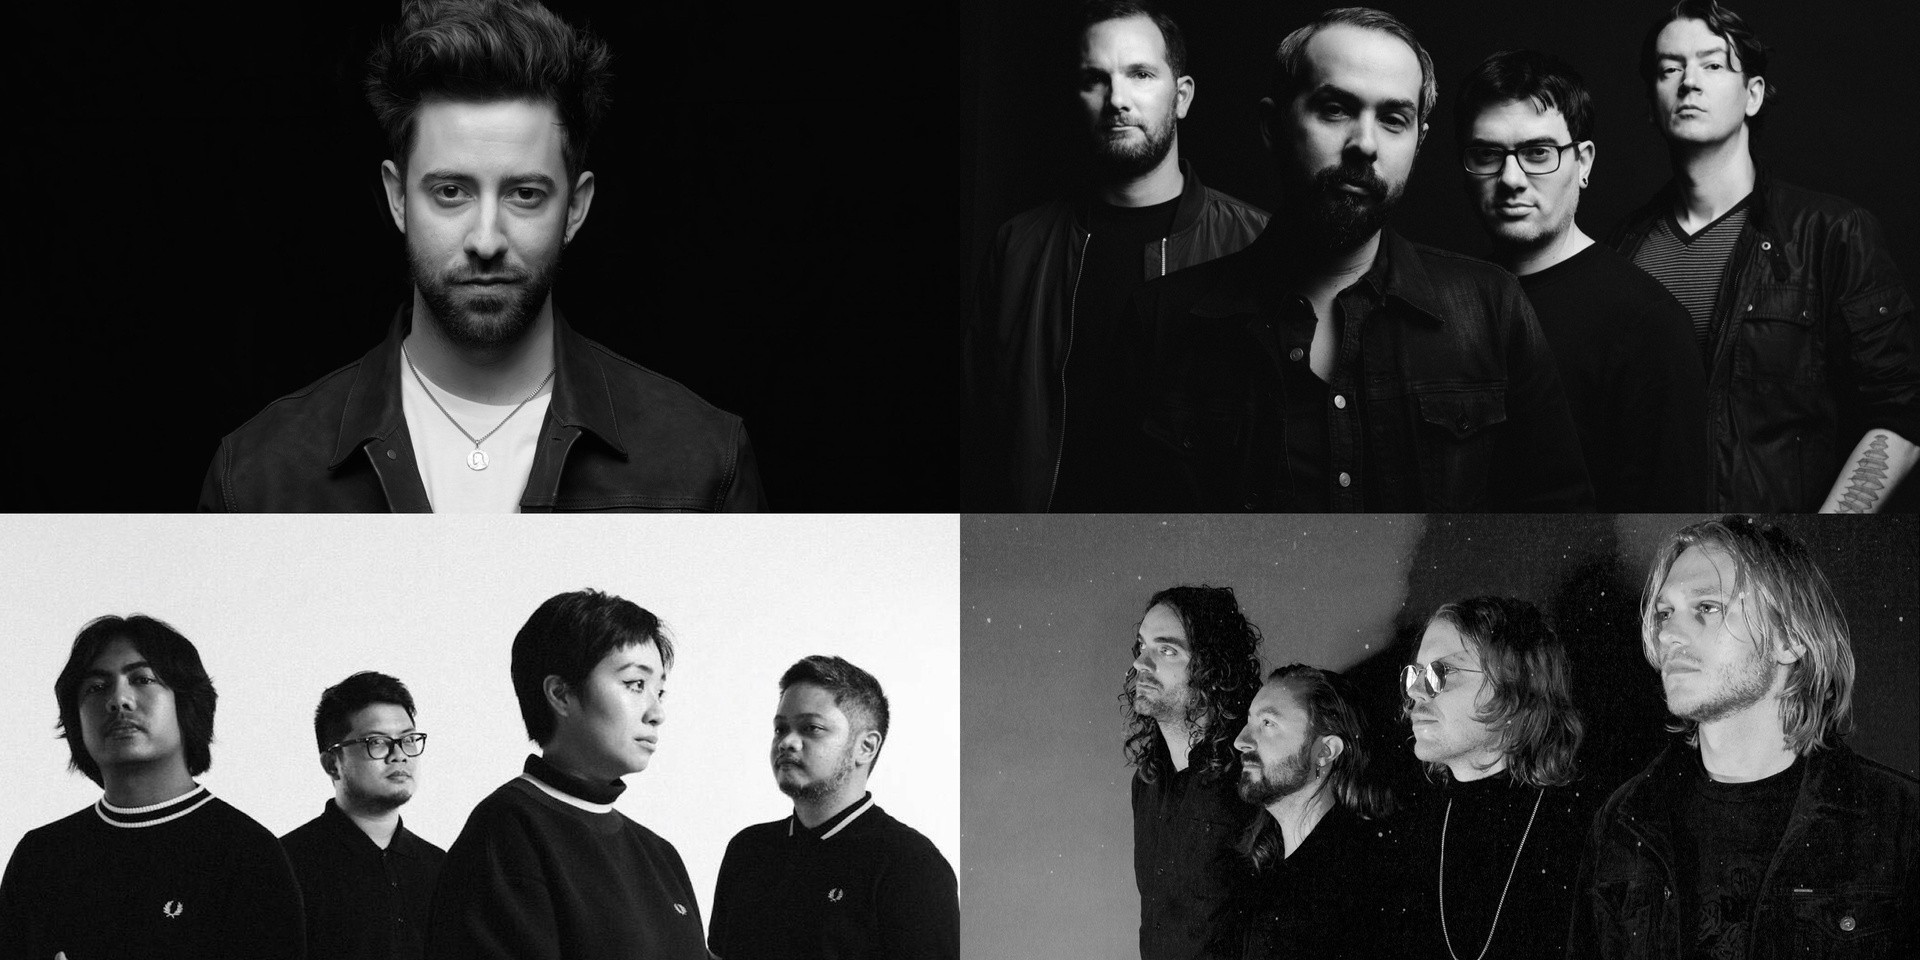 Karpos Live unveils Mix 3 lineup - Cigarettes After Sex, Bruno Major, The Royal Concept, UDD, and more